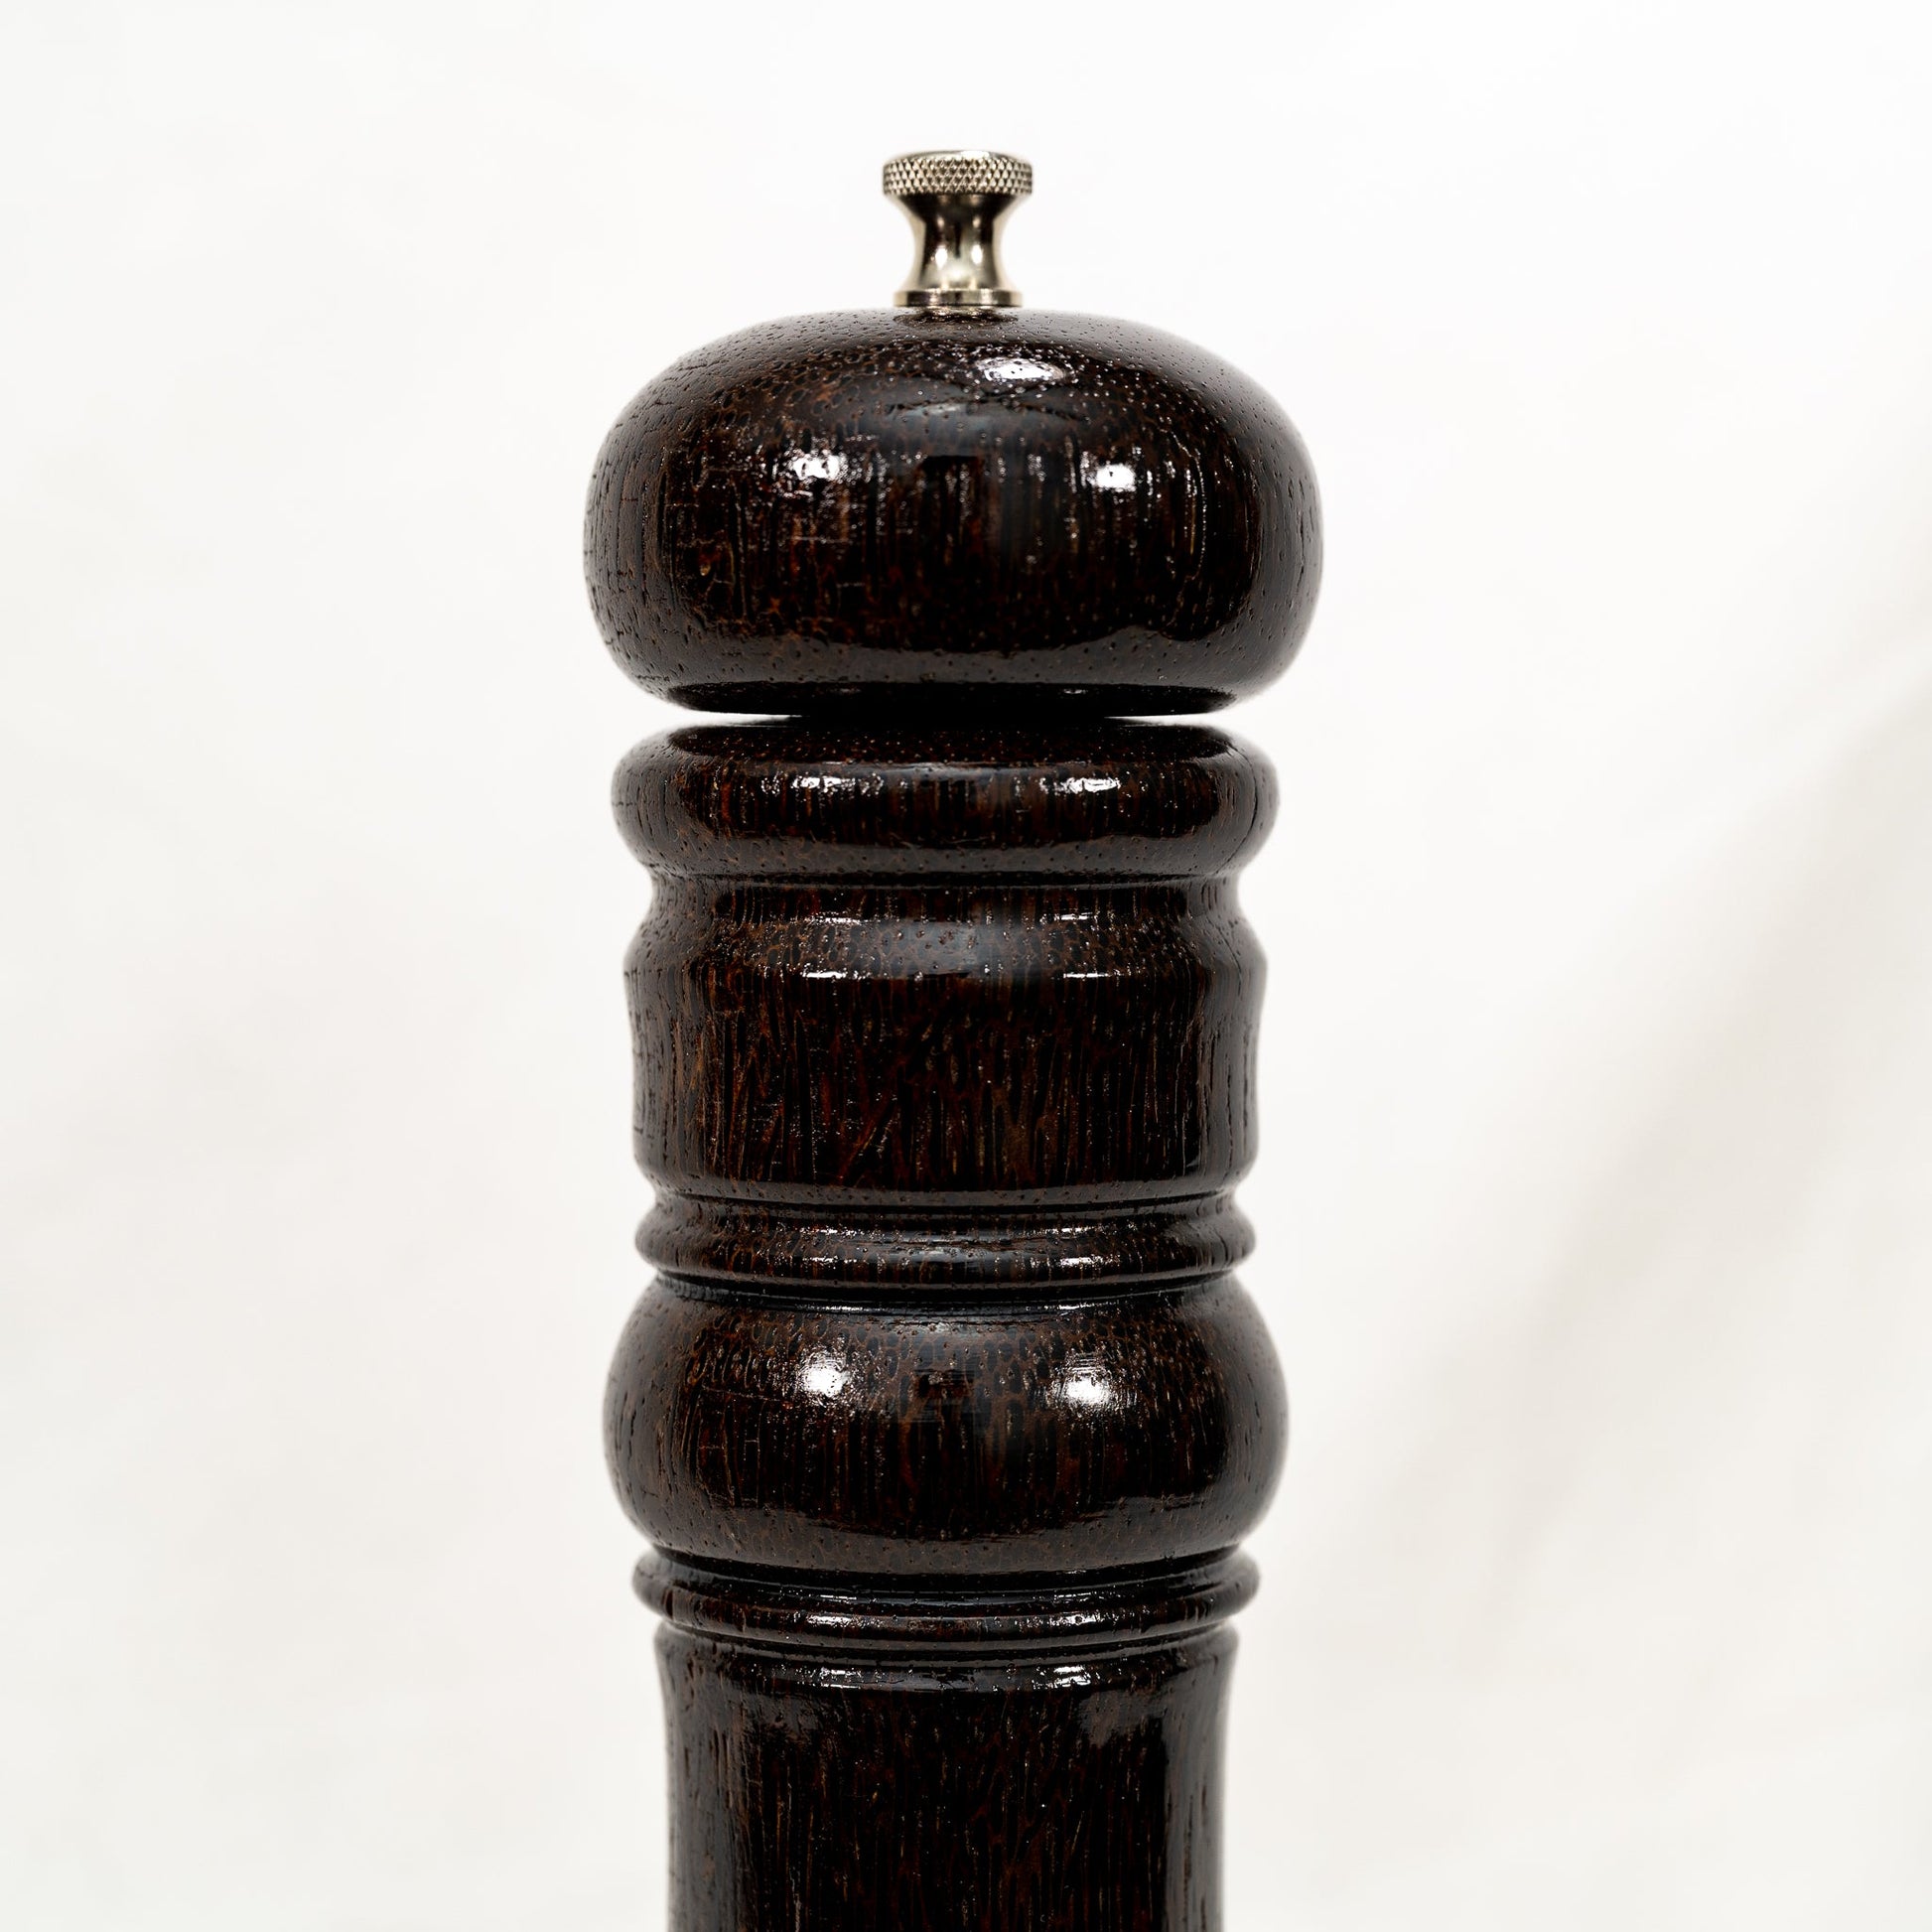 Handmade large Black Palm wood pepper mill with stainless steel grinder